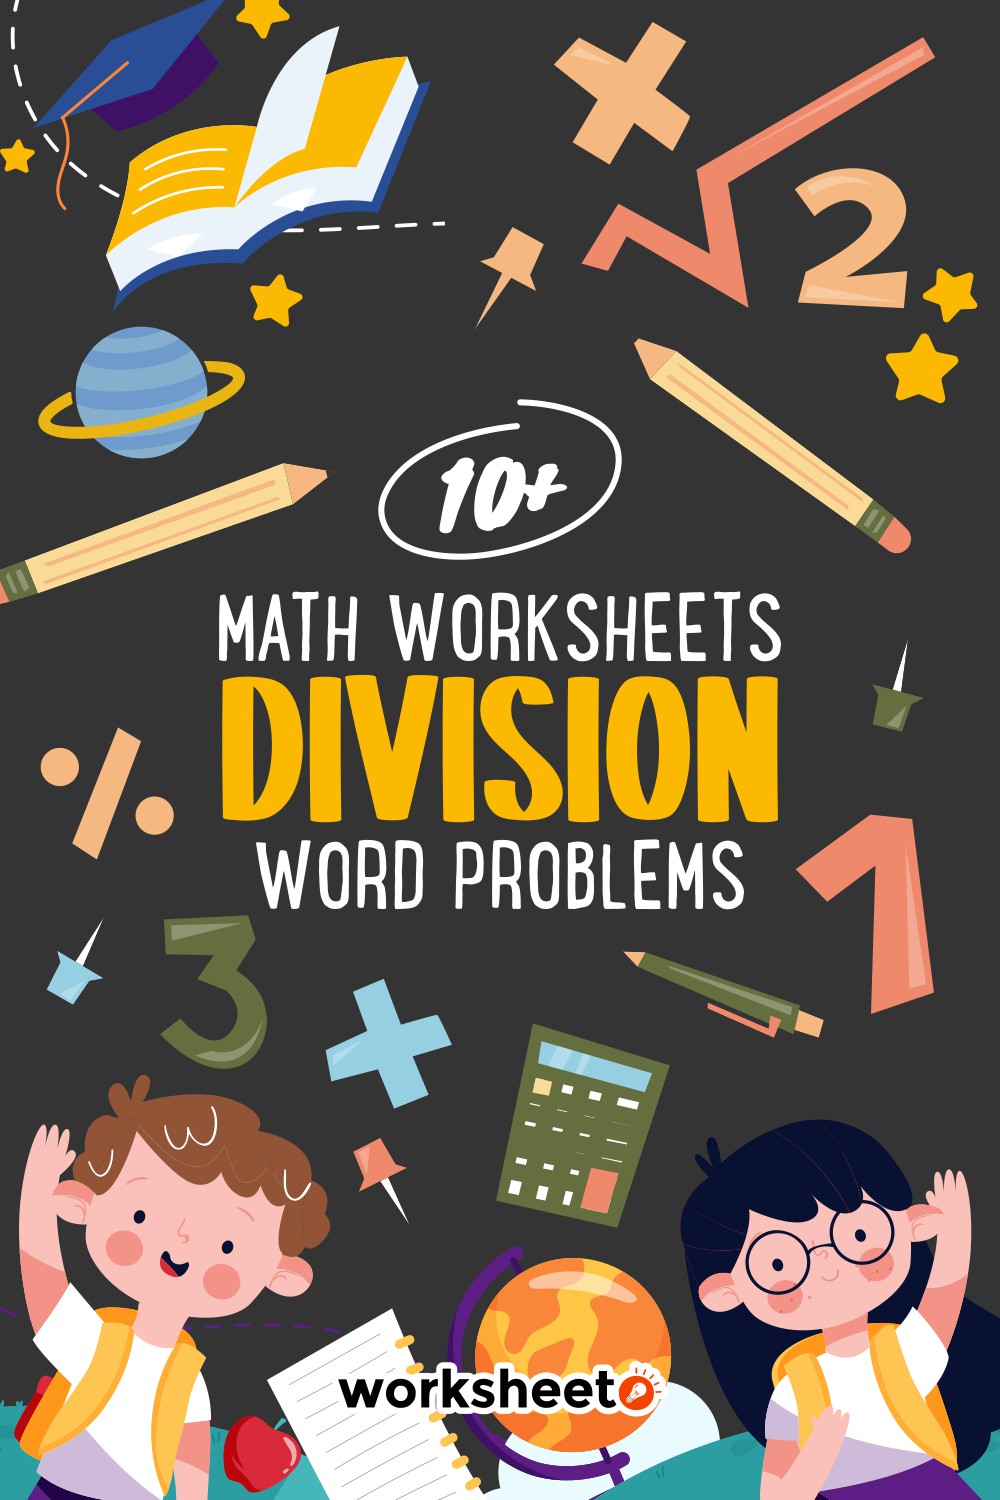 19 Images of Math Worksheets Division Word Problems